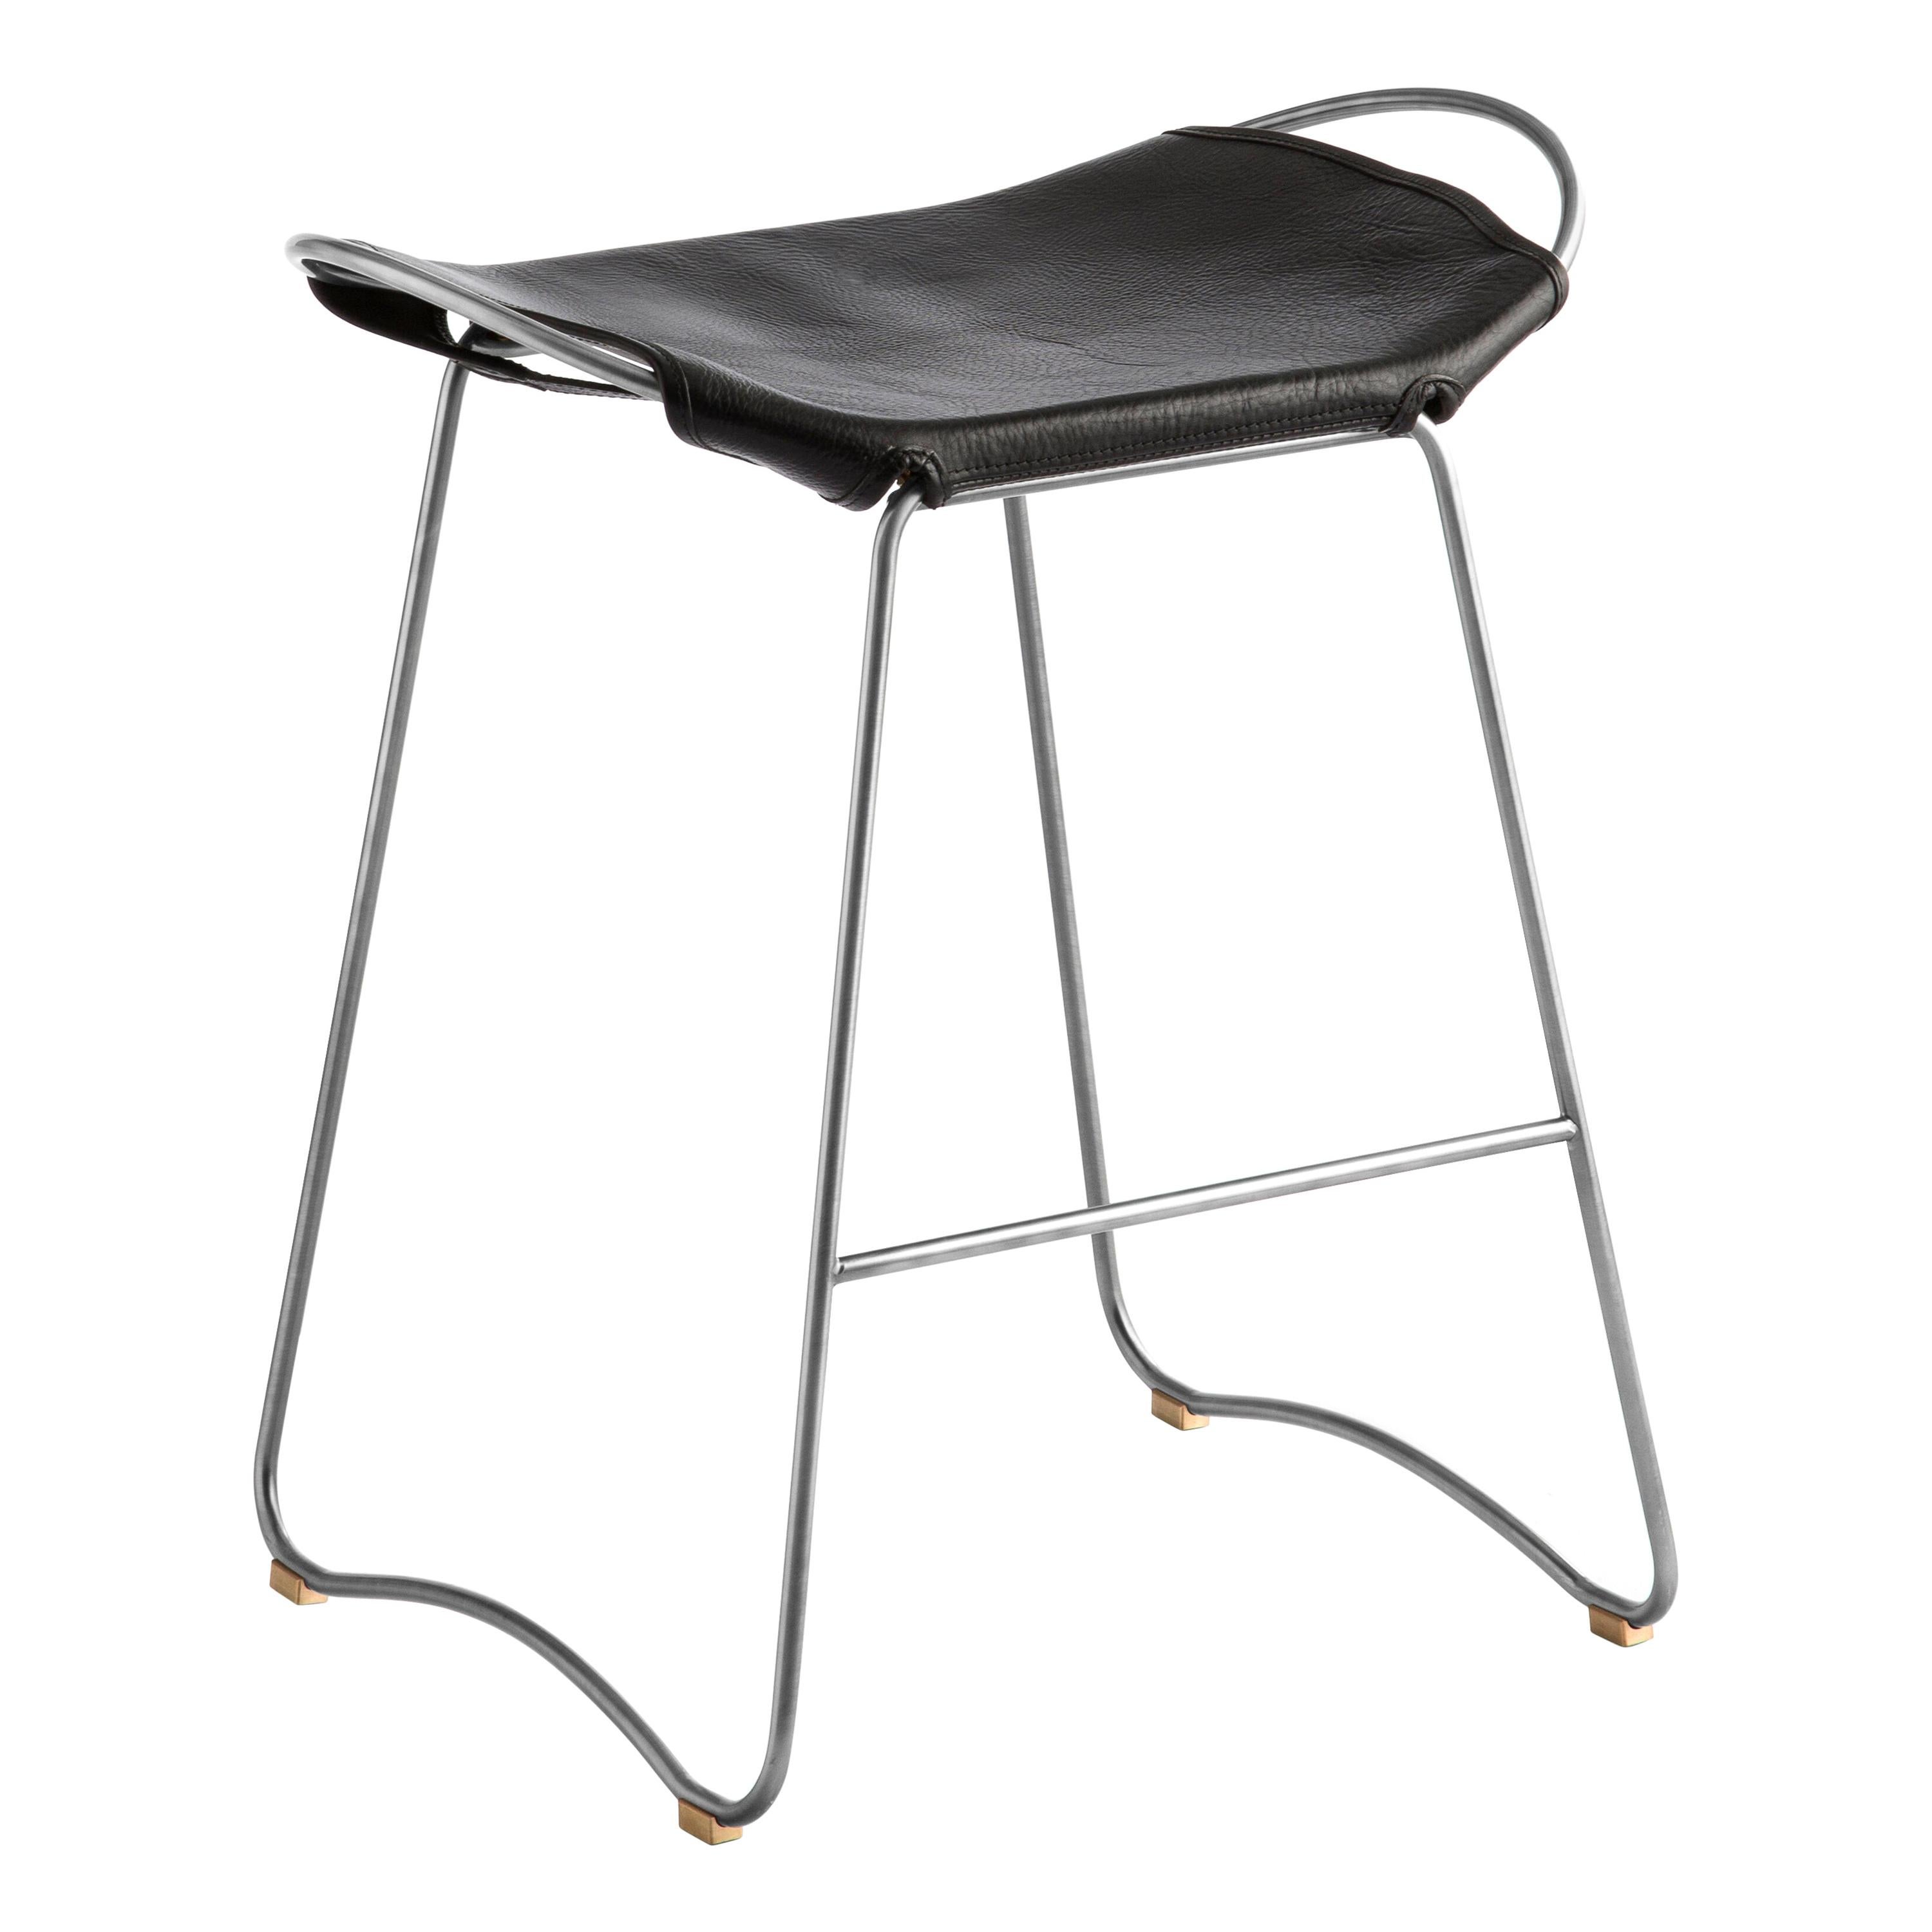 Sculptural Organic Contemporary Bar Stool Old Silver & Black Leather  Sample For Sale